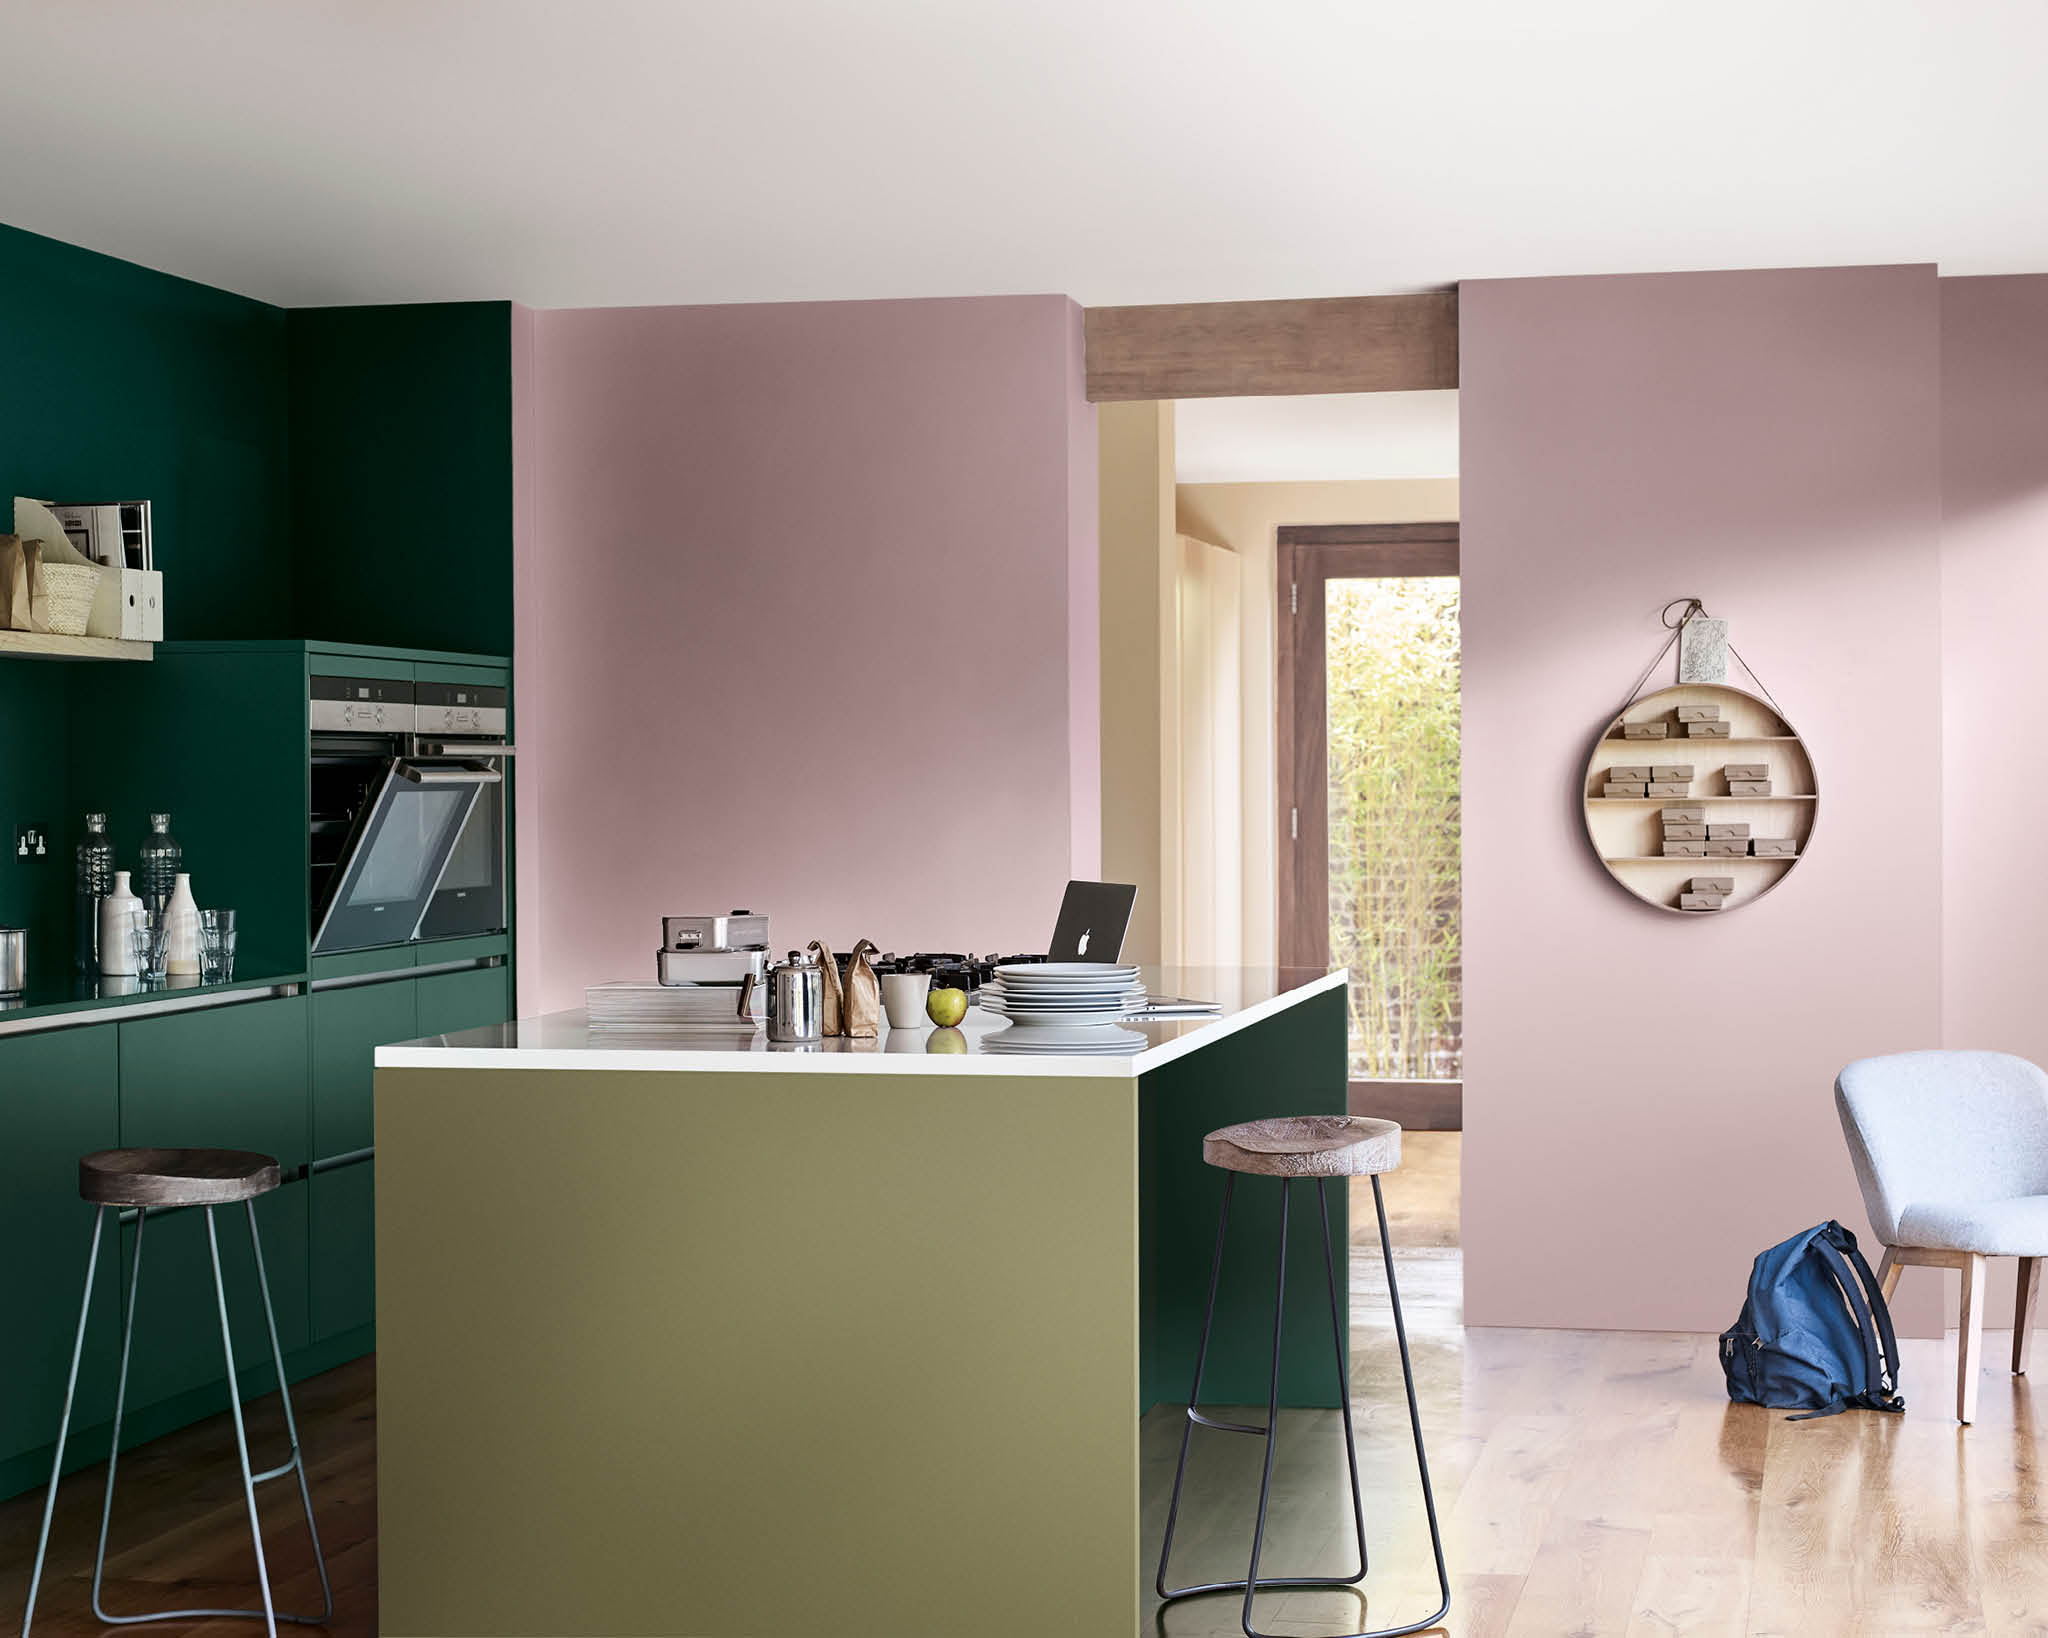 4 ways to colour your kitchen with Dulux Colour of the Year 2018 | Dulux